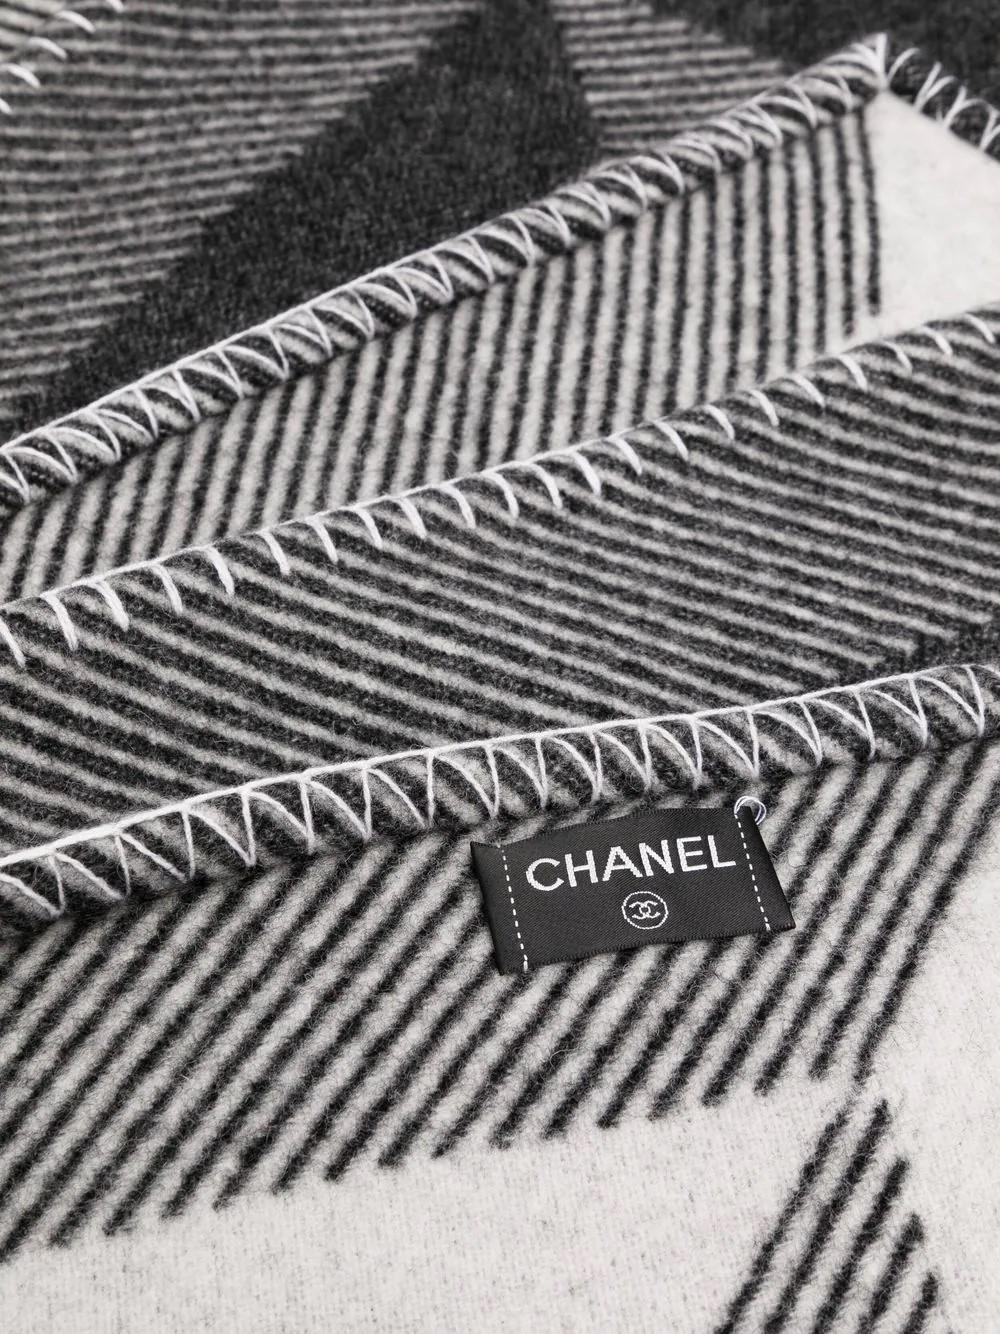 Live in absolute luxury with this cashmere wool blend Chanel blanket. With the classic interlocking double CC logo at the centre of the blanket, you can bring a little Chanel into your living room or bedroom. 

Colour: Grey

Composition: Wool/